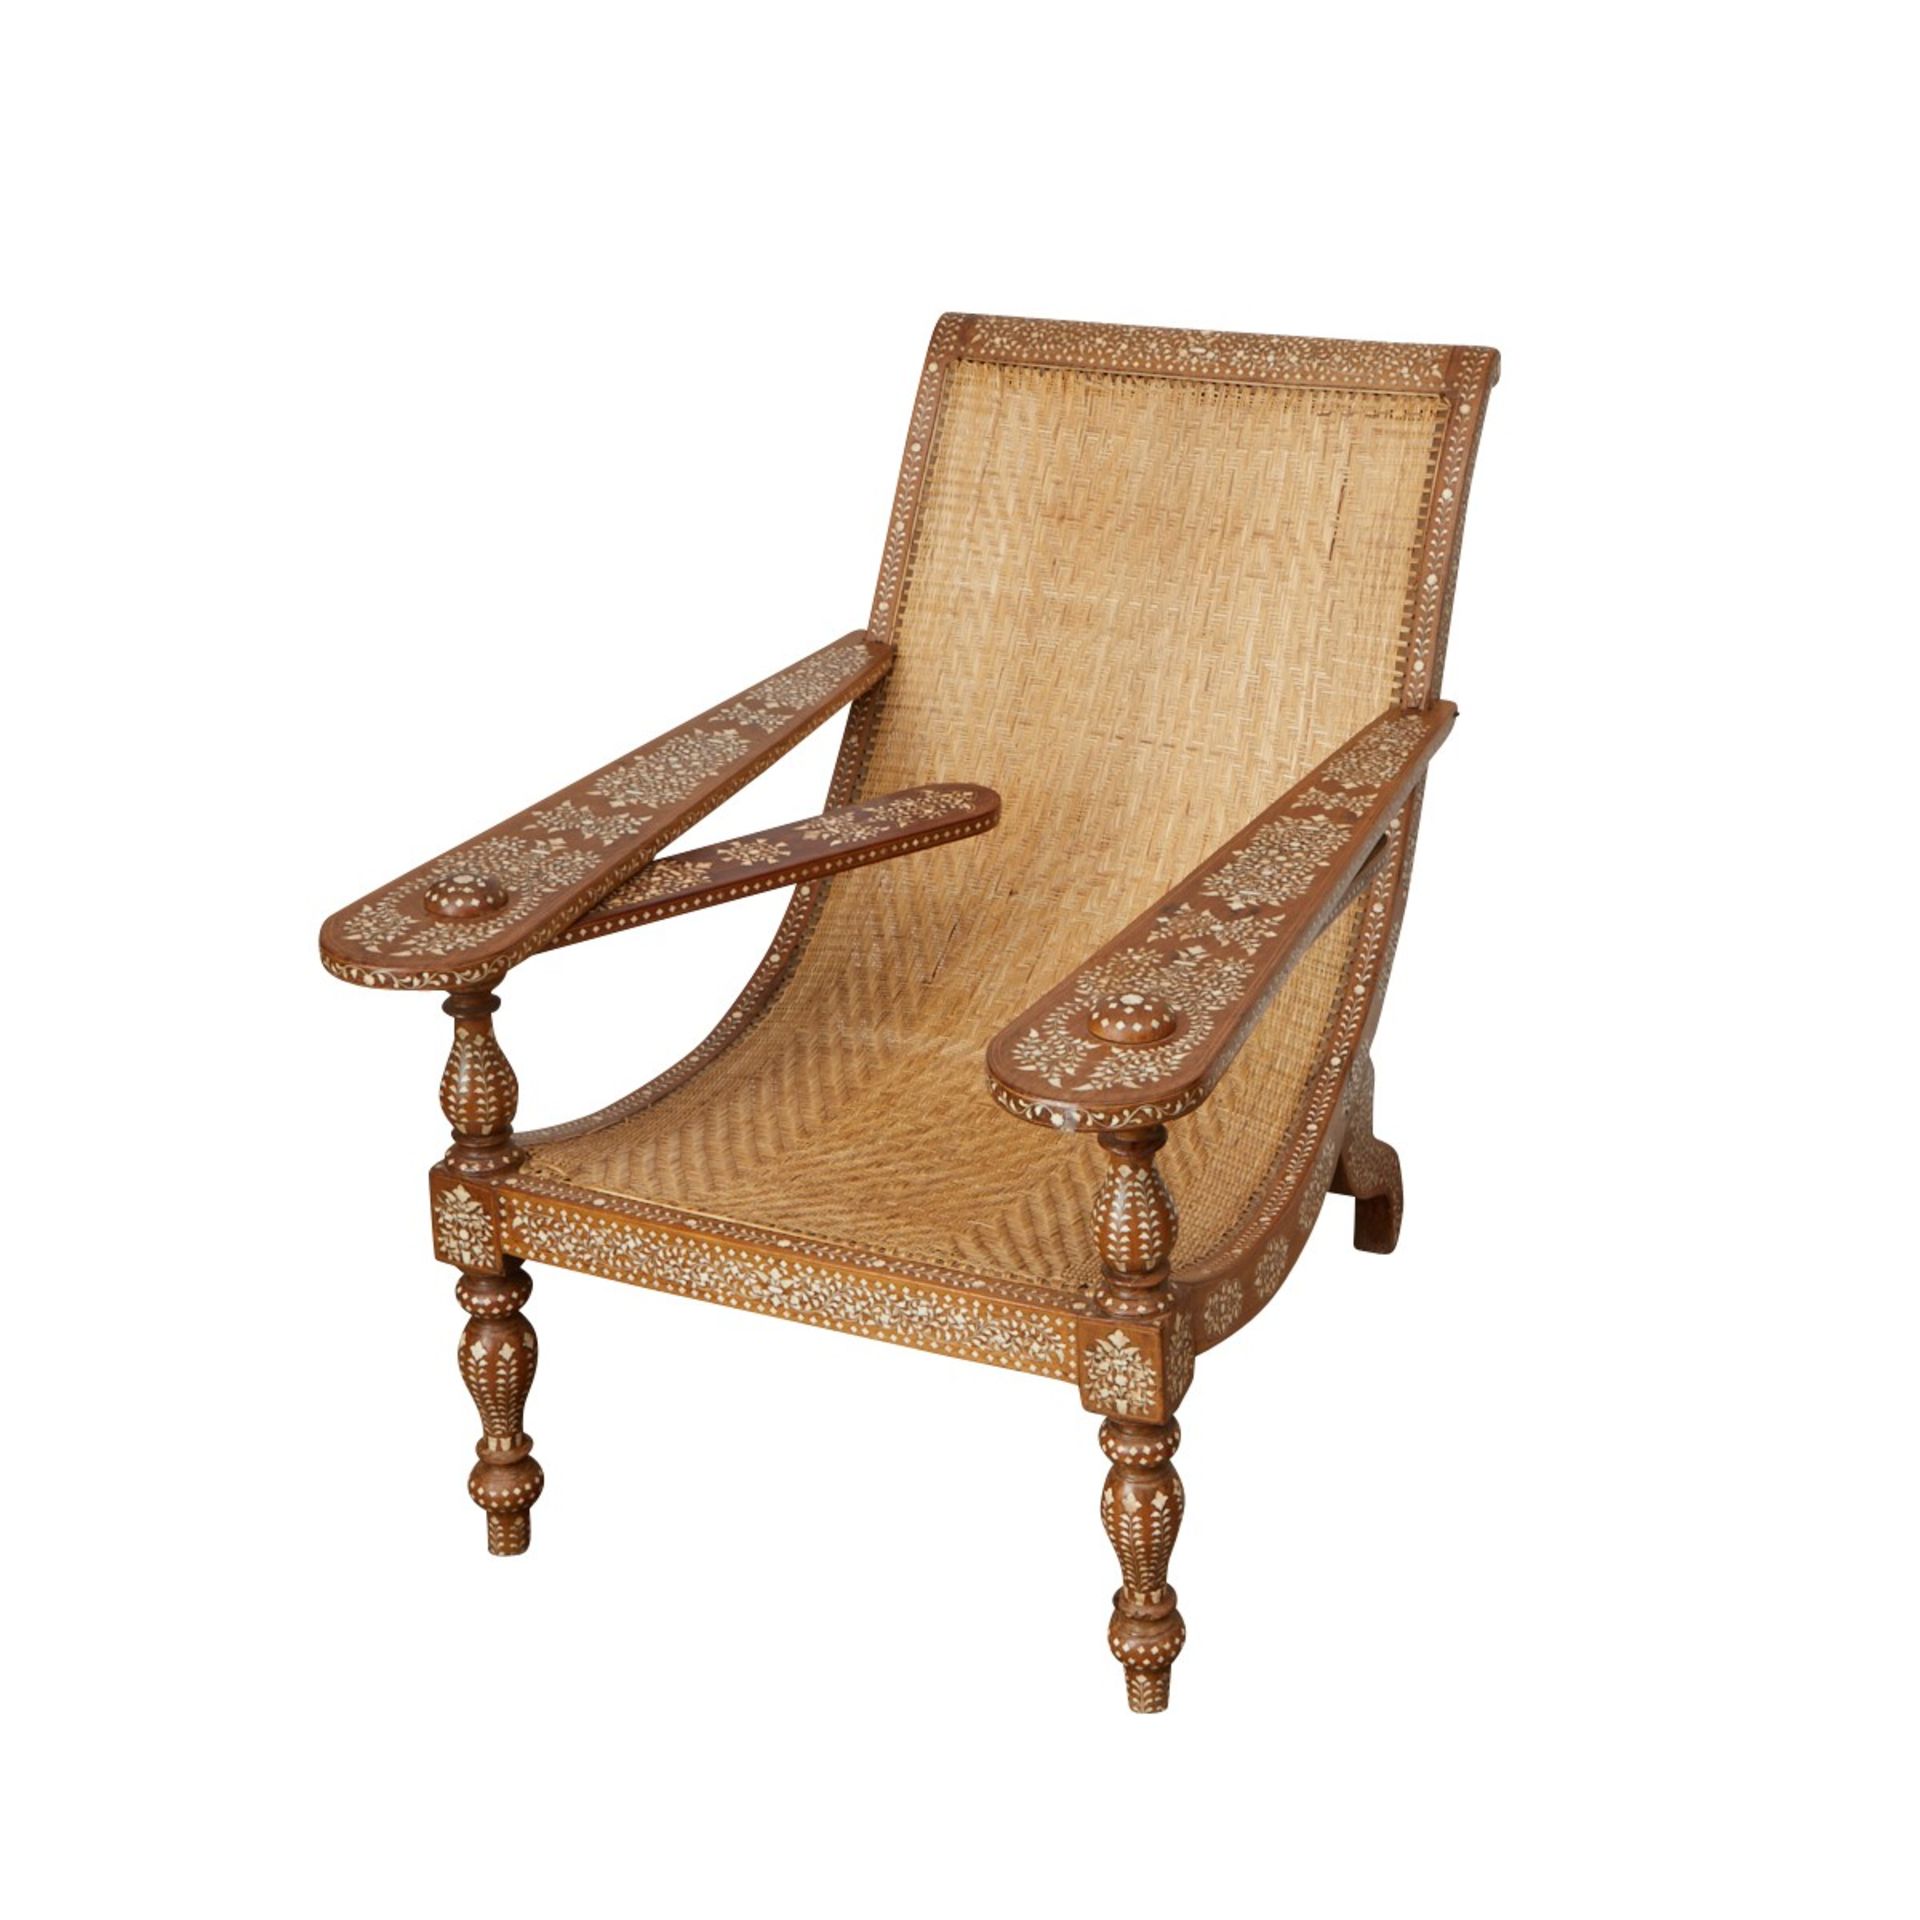 Syrian Inlaid Mother of Pearl Plantation Chair - Image 2 of 16